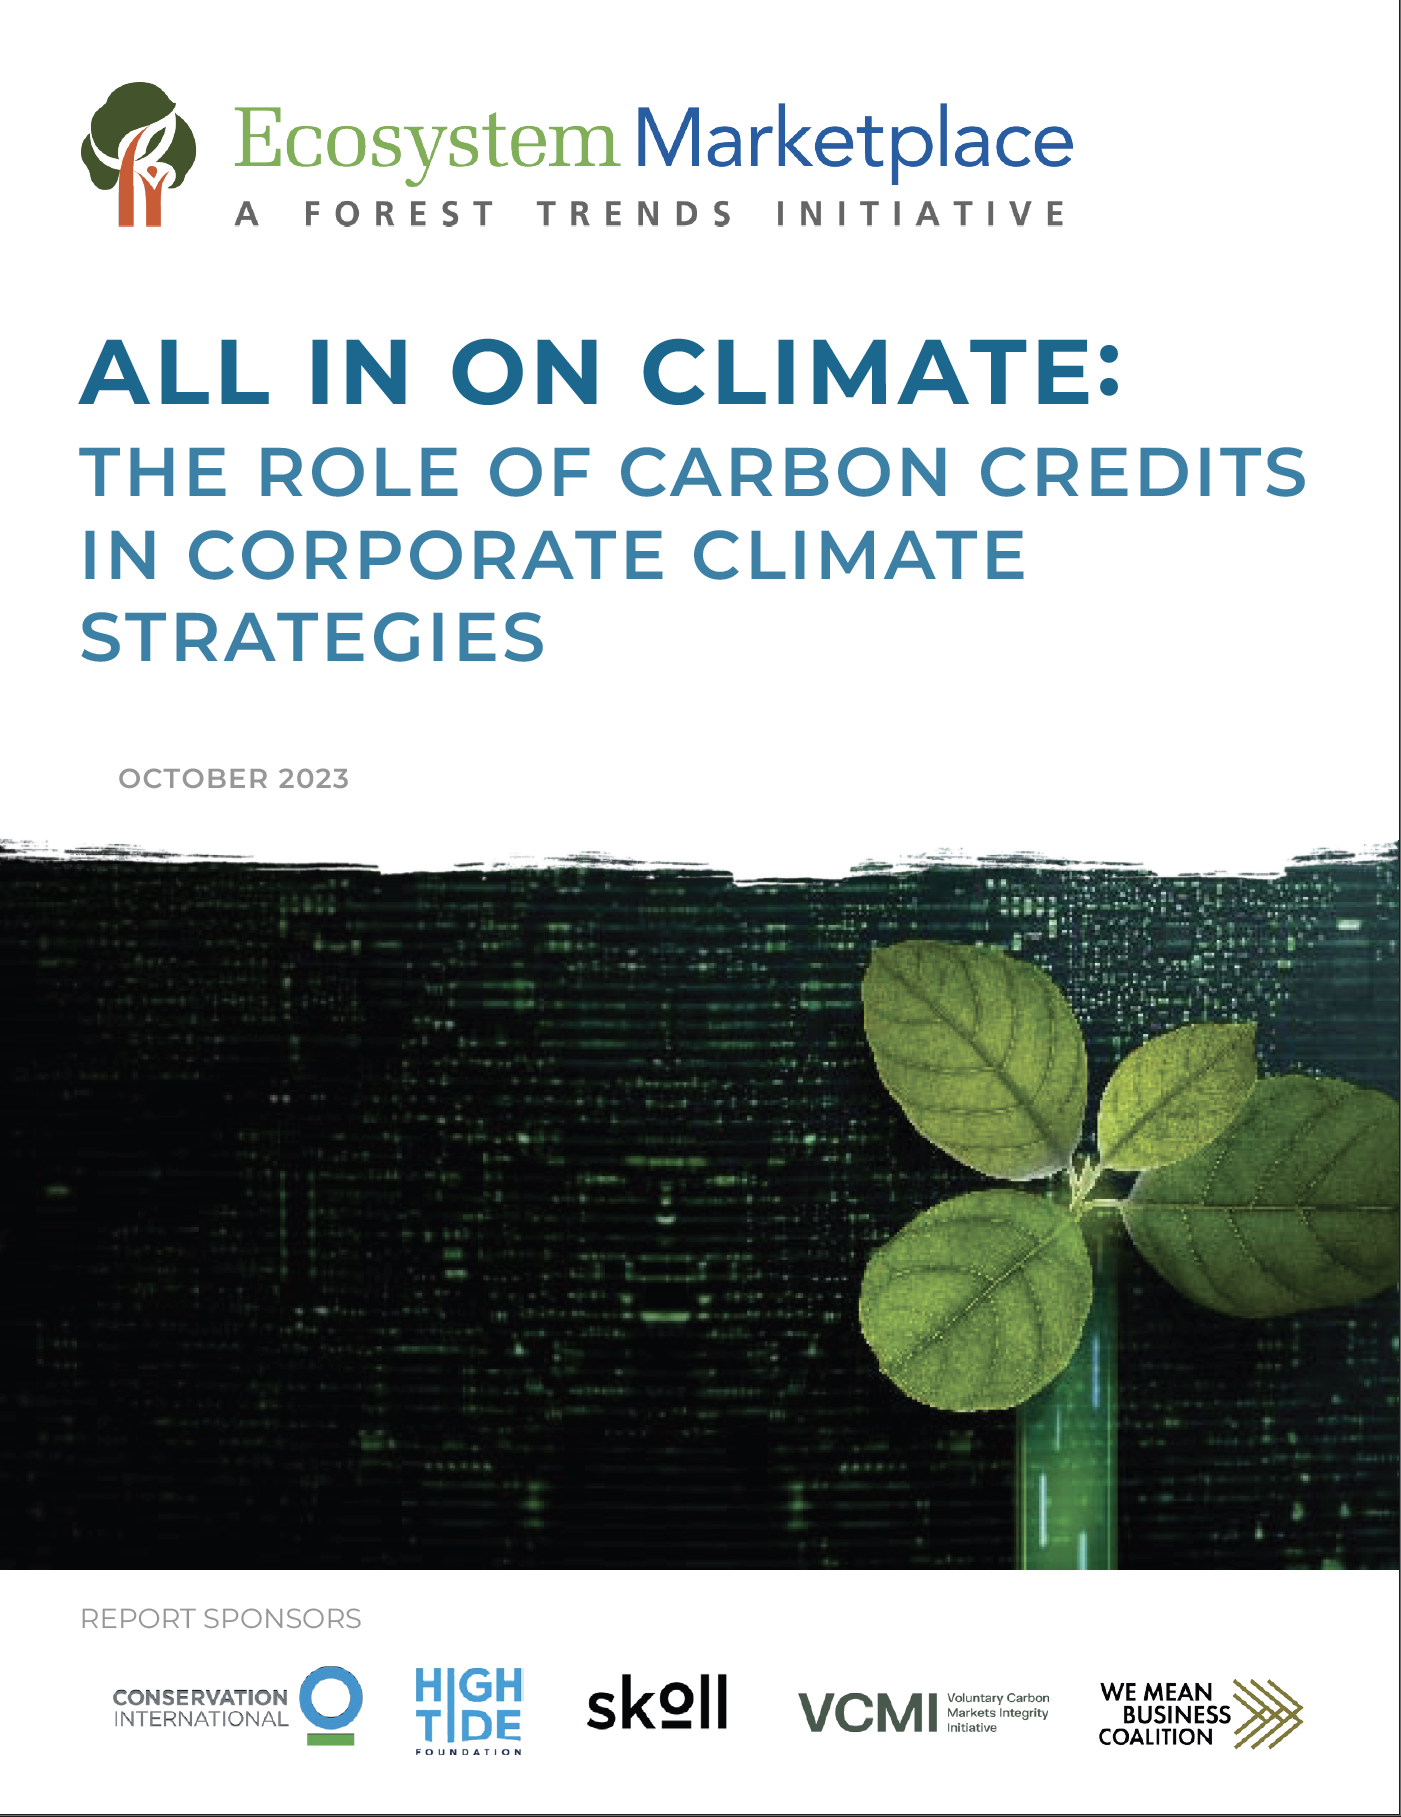 All In On Climate: The Role of Carbon Credits in Corporate Climate